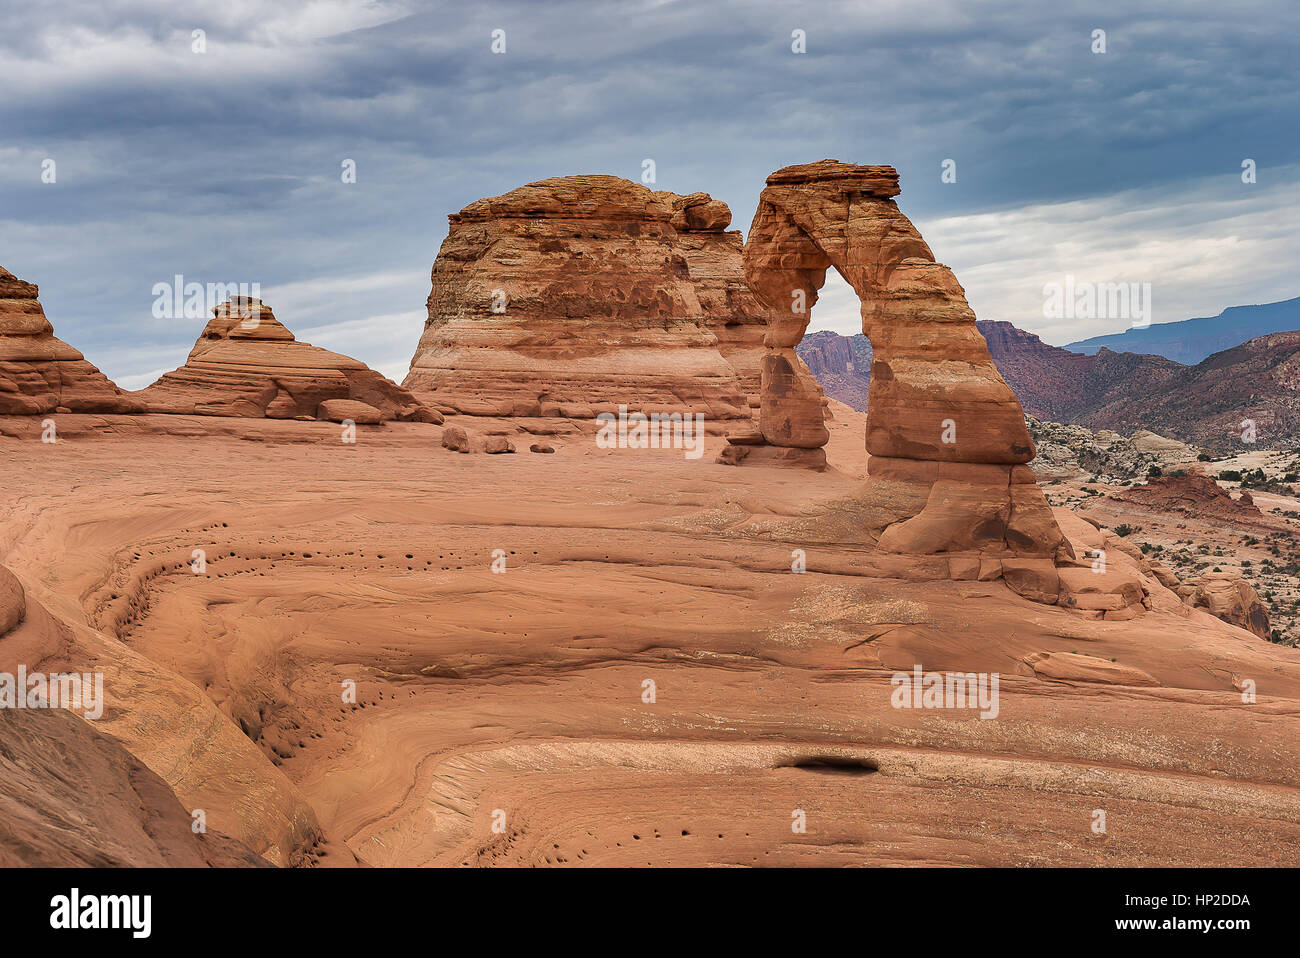 Amazing erosion of rock, Delicate Arch at Arches National Park Utah Stock Photo